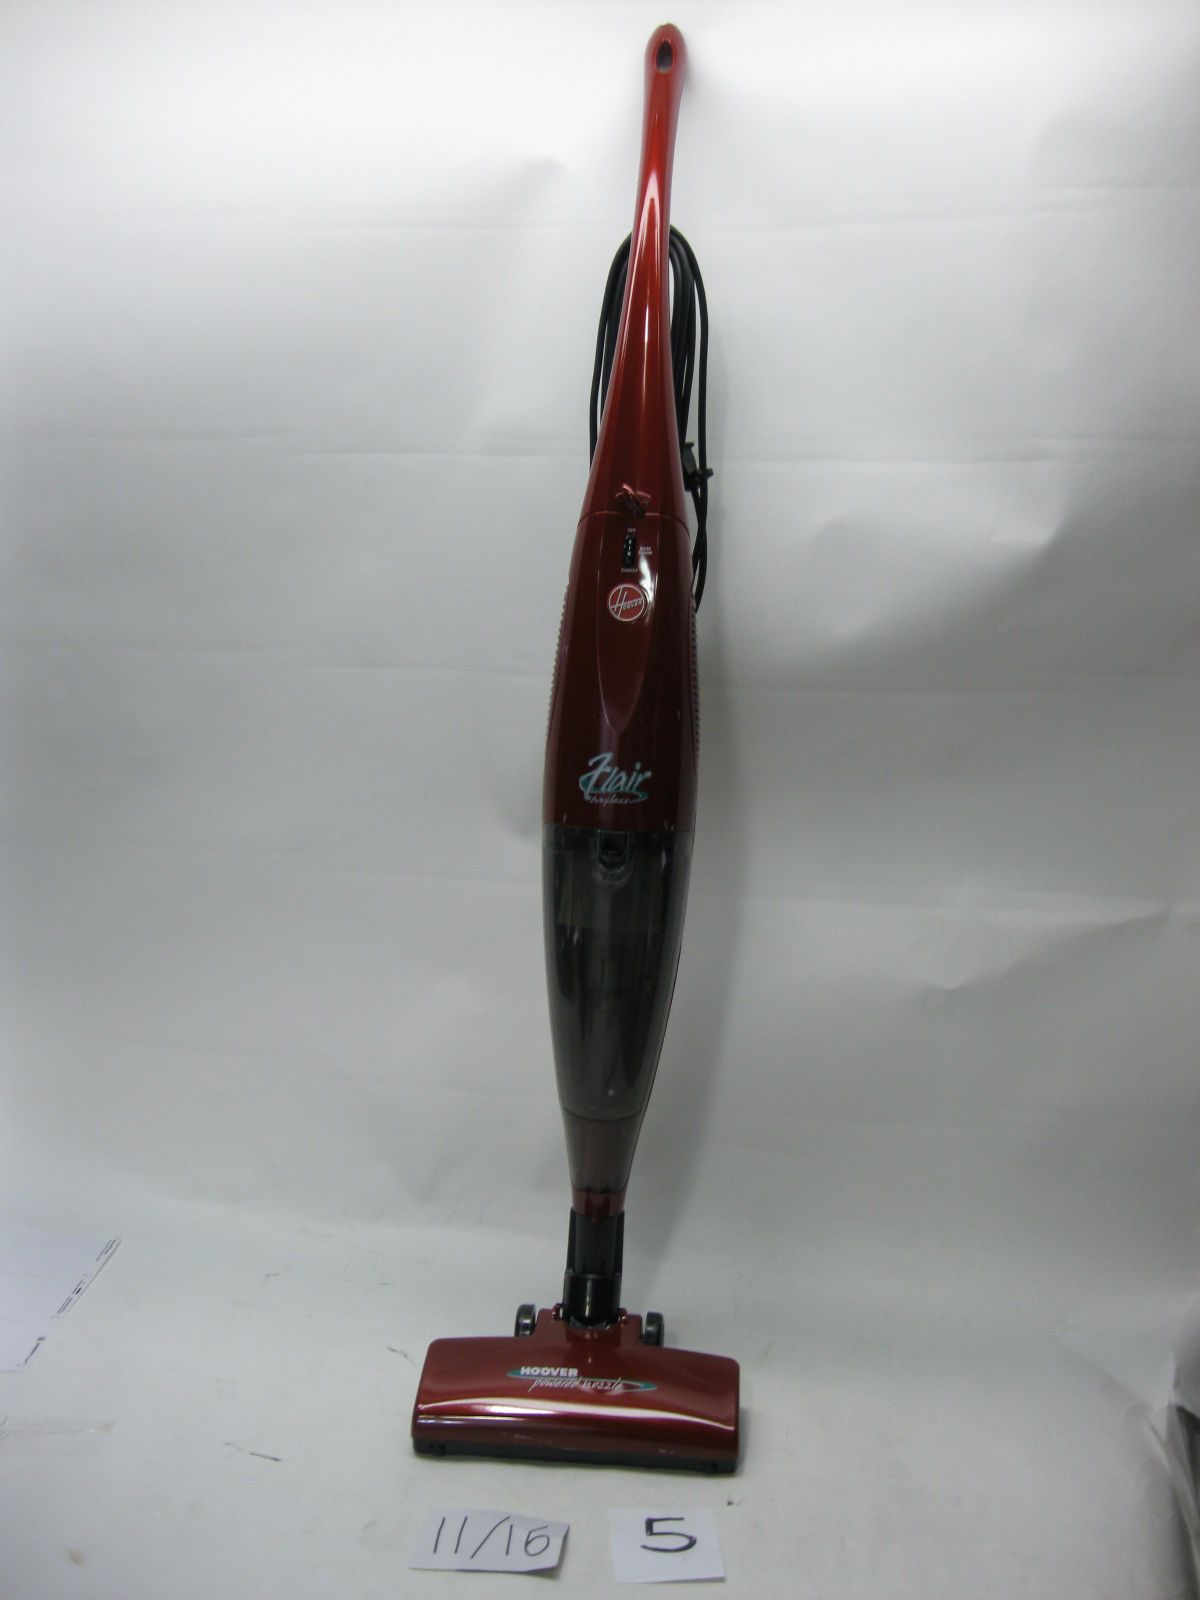 Hoover Flair Bagless Upright Stick Vacuum with Power Nozzle S2220 (11